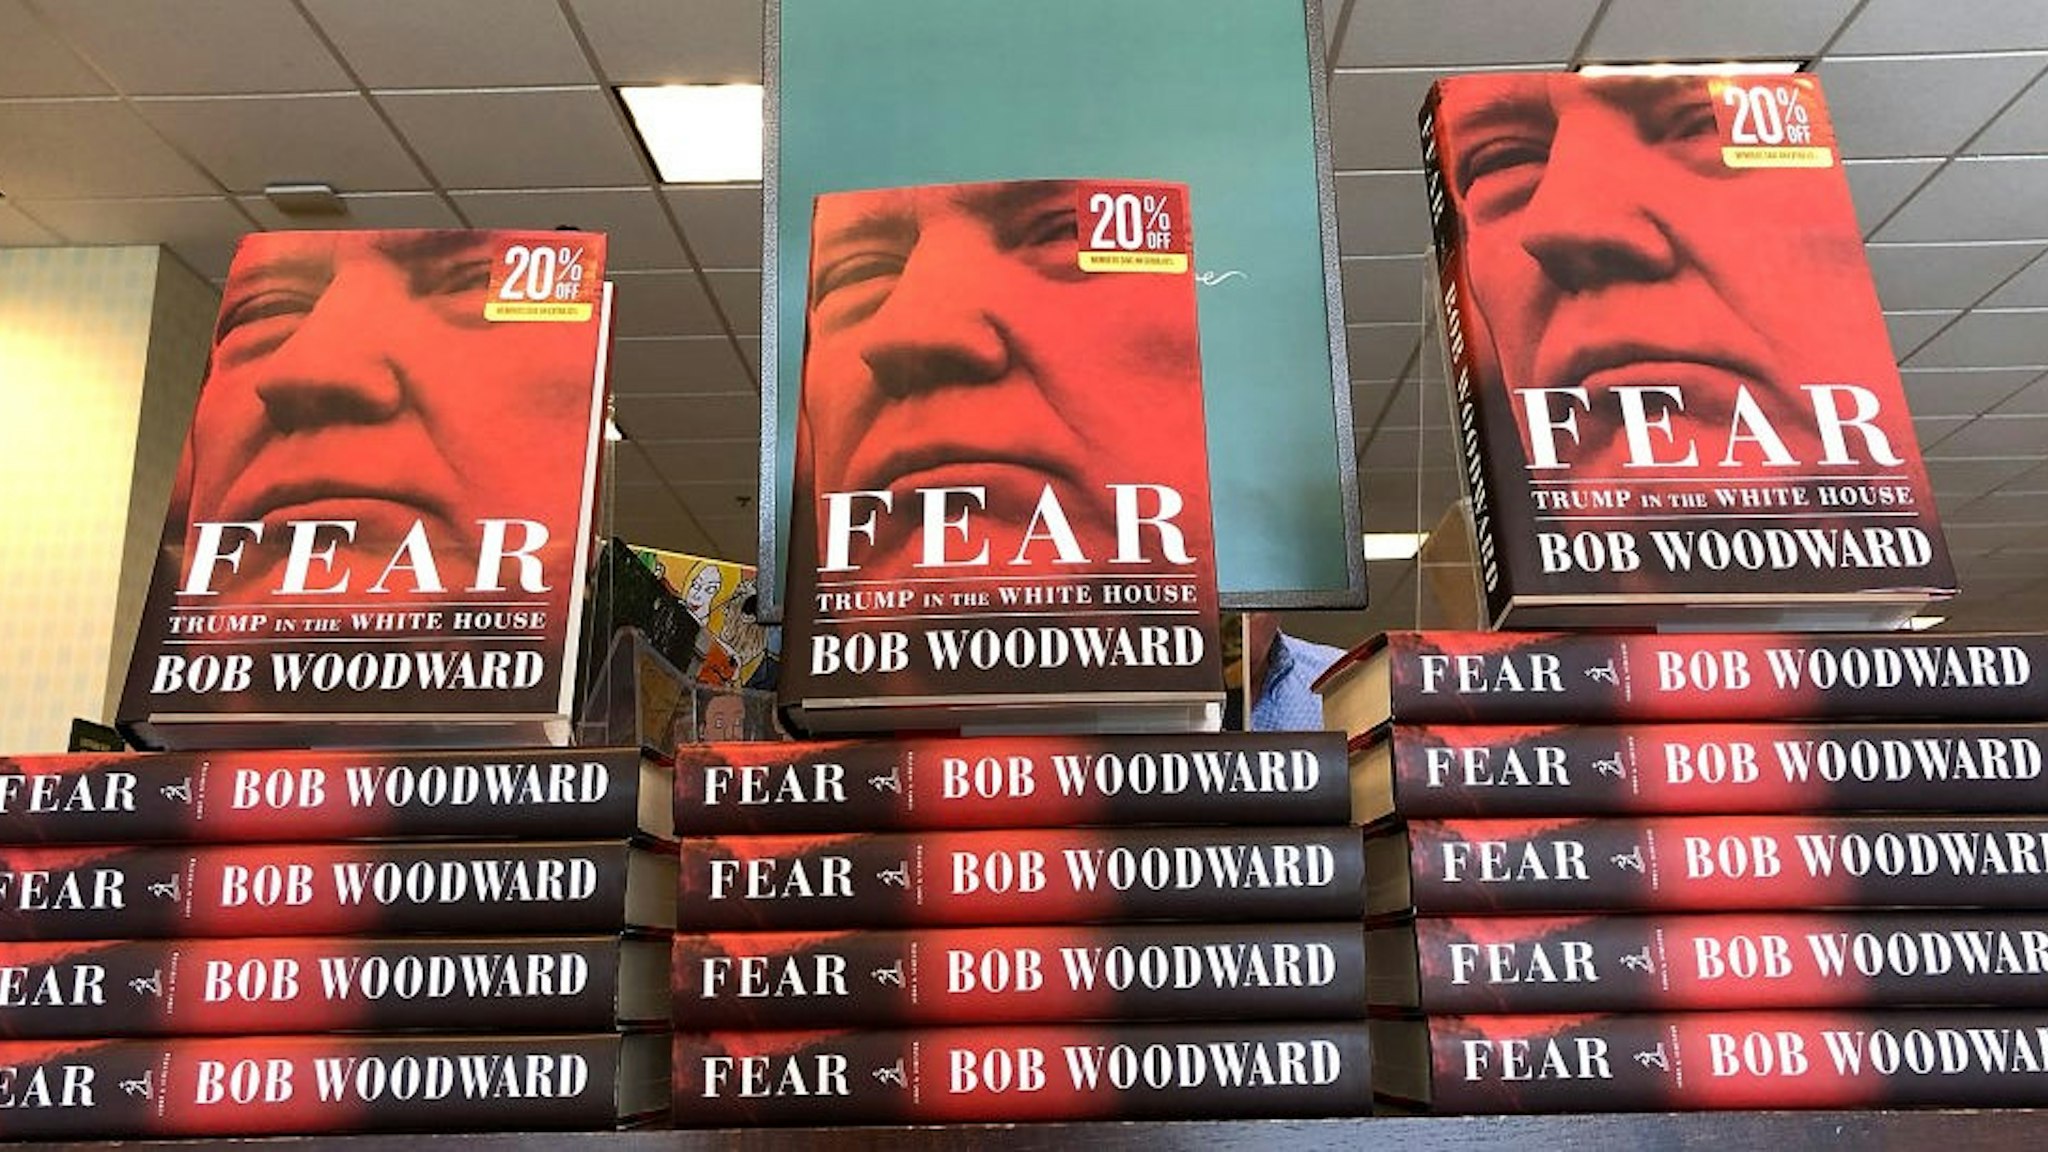 CORTE MADERA, CA - SEPTEMBER 11: The newly released book "Fear" by Bob Woodward is displayed at a Barnes and Noble bookstore on September 11, 2018 in Corte Madera, California. The new book "Fear" by Bob Woodward about the Trump adminstration hit store shelves today. (Photo by